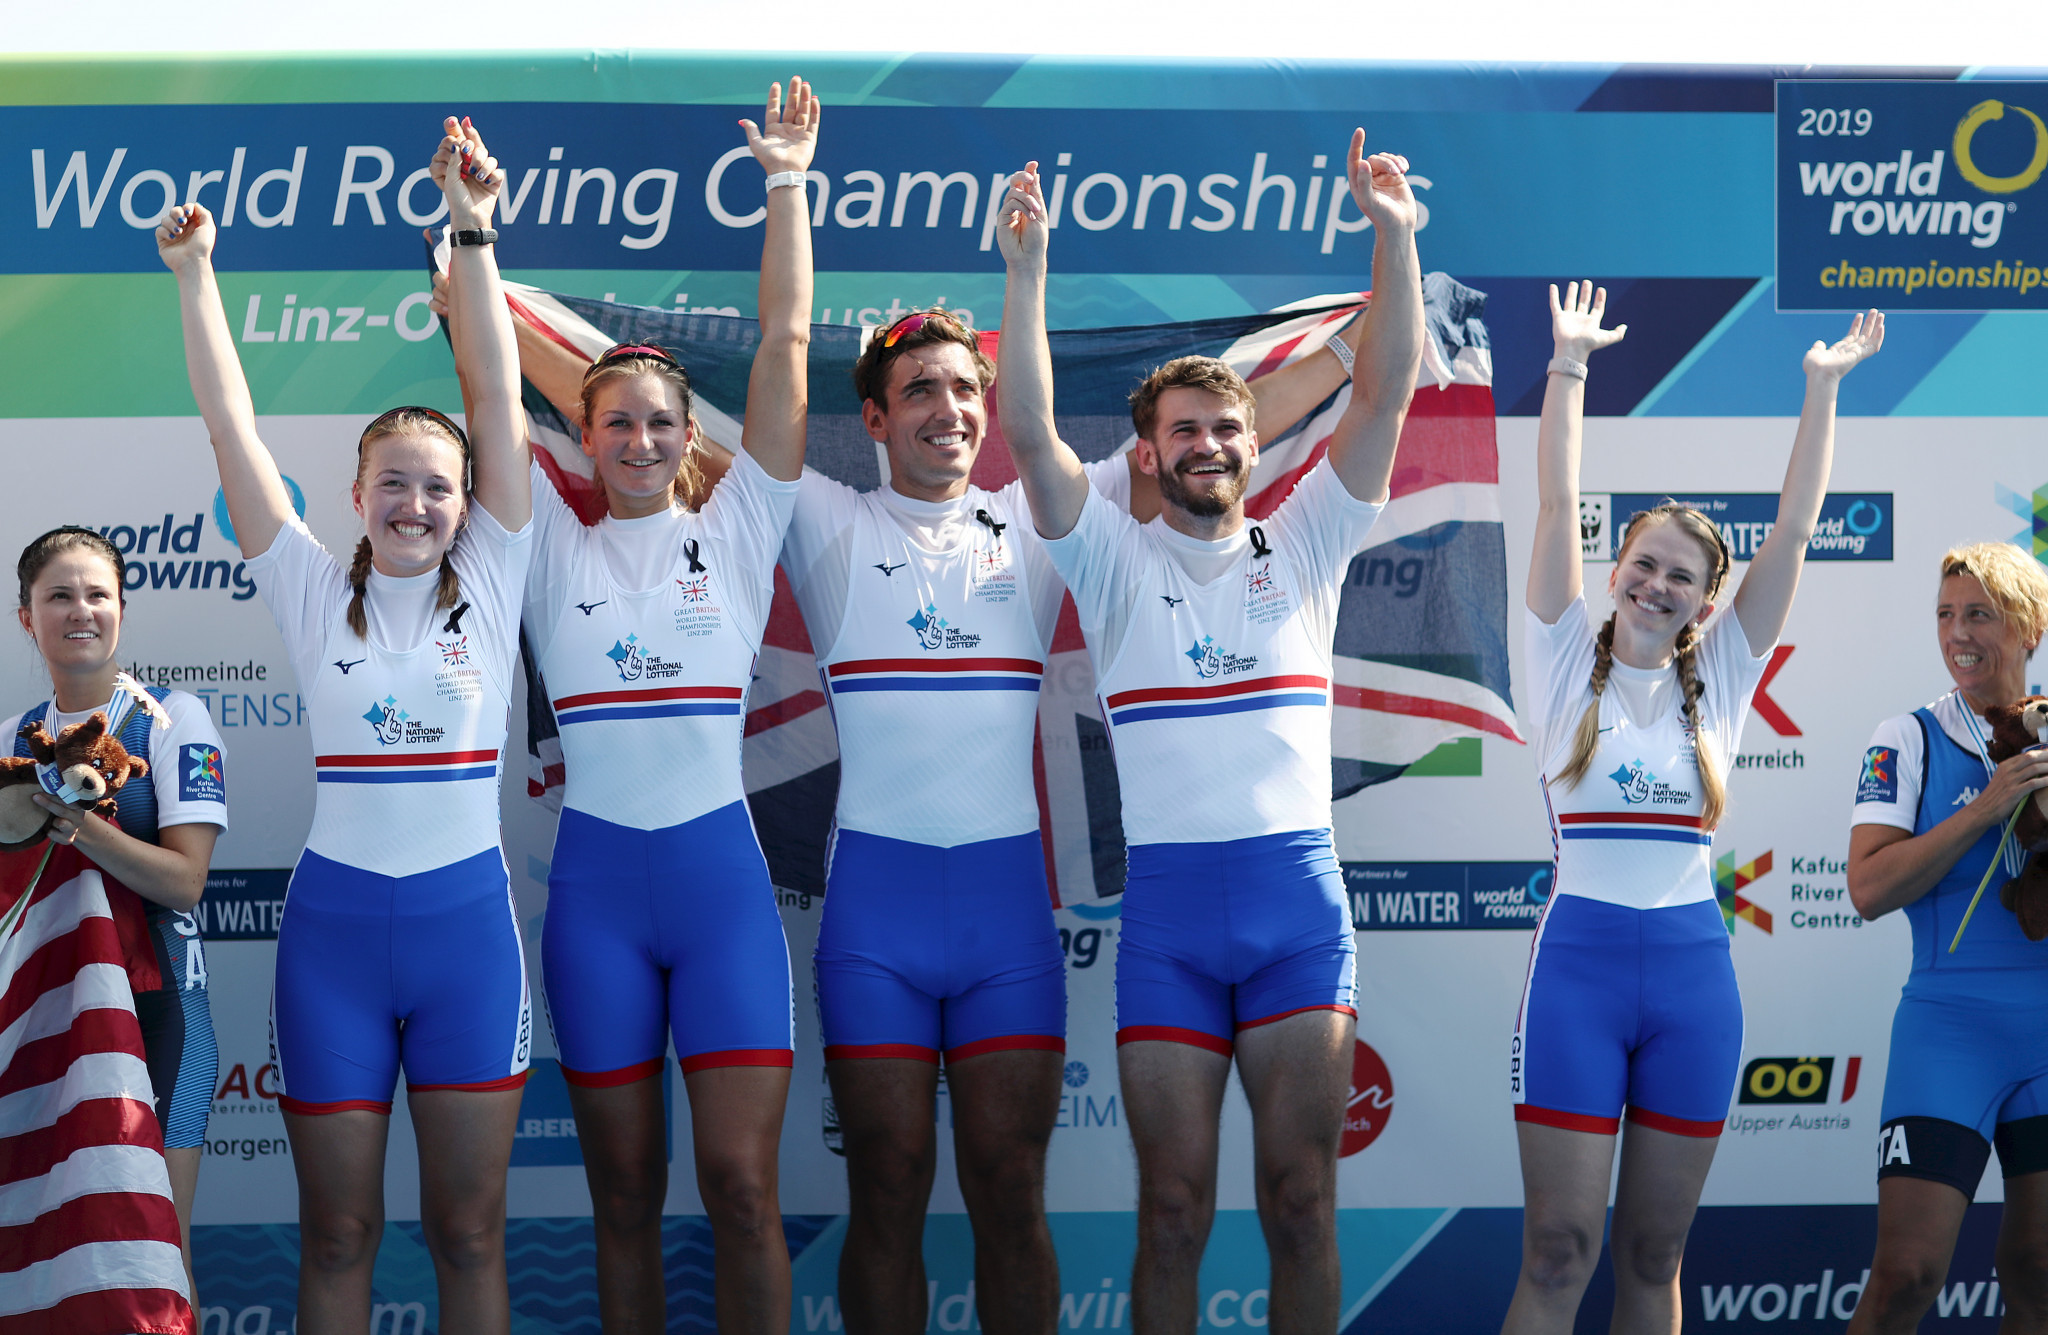 World Rowing and Eurovision Sport renew partnership until 2024